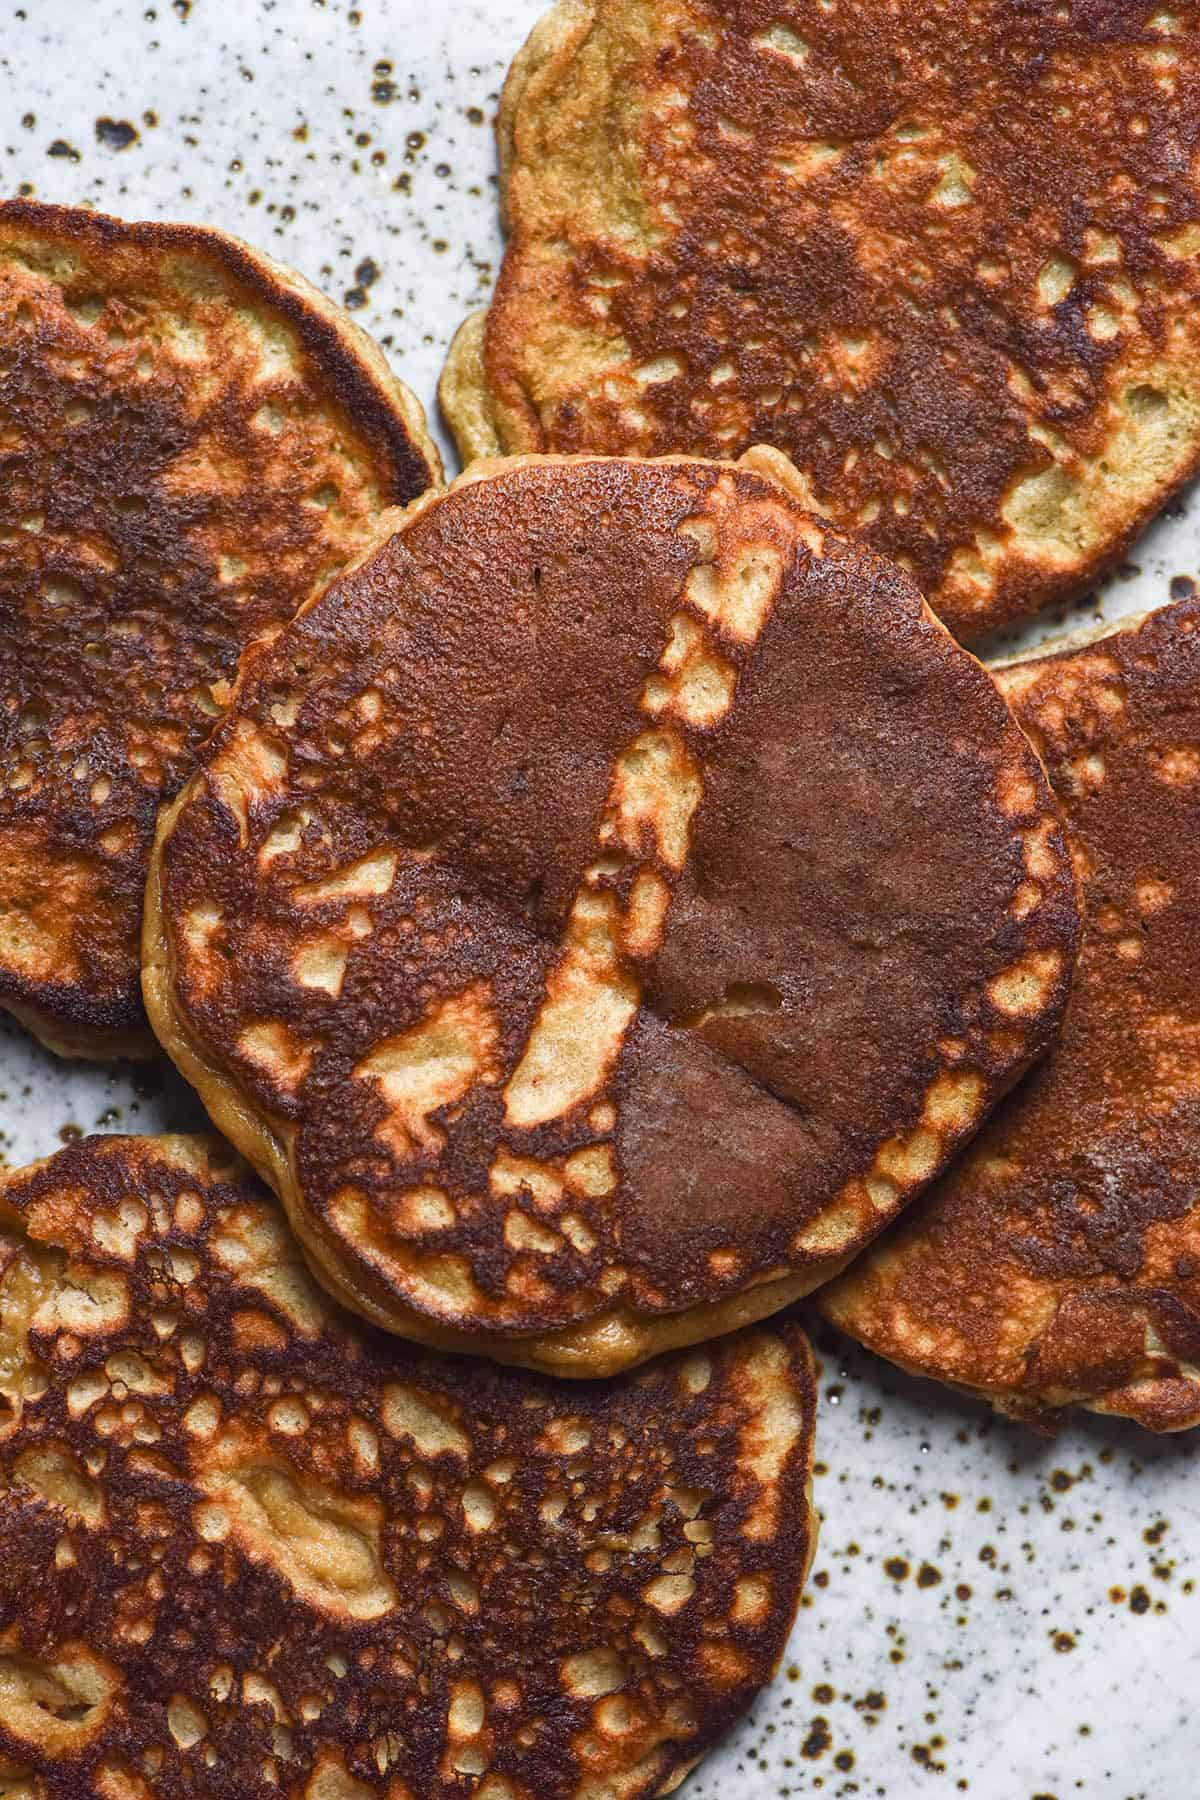 An aerial view of golden brown protein powder pancakes arranged on a white speckled ceramic plate